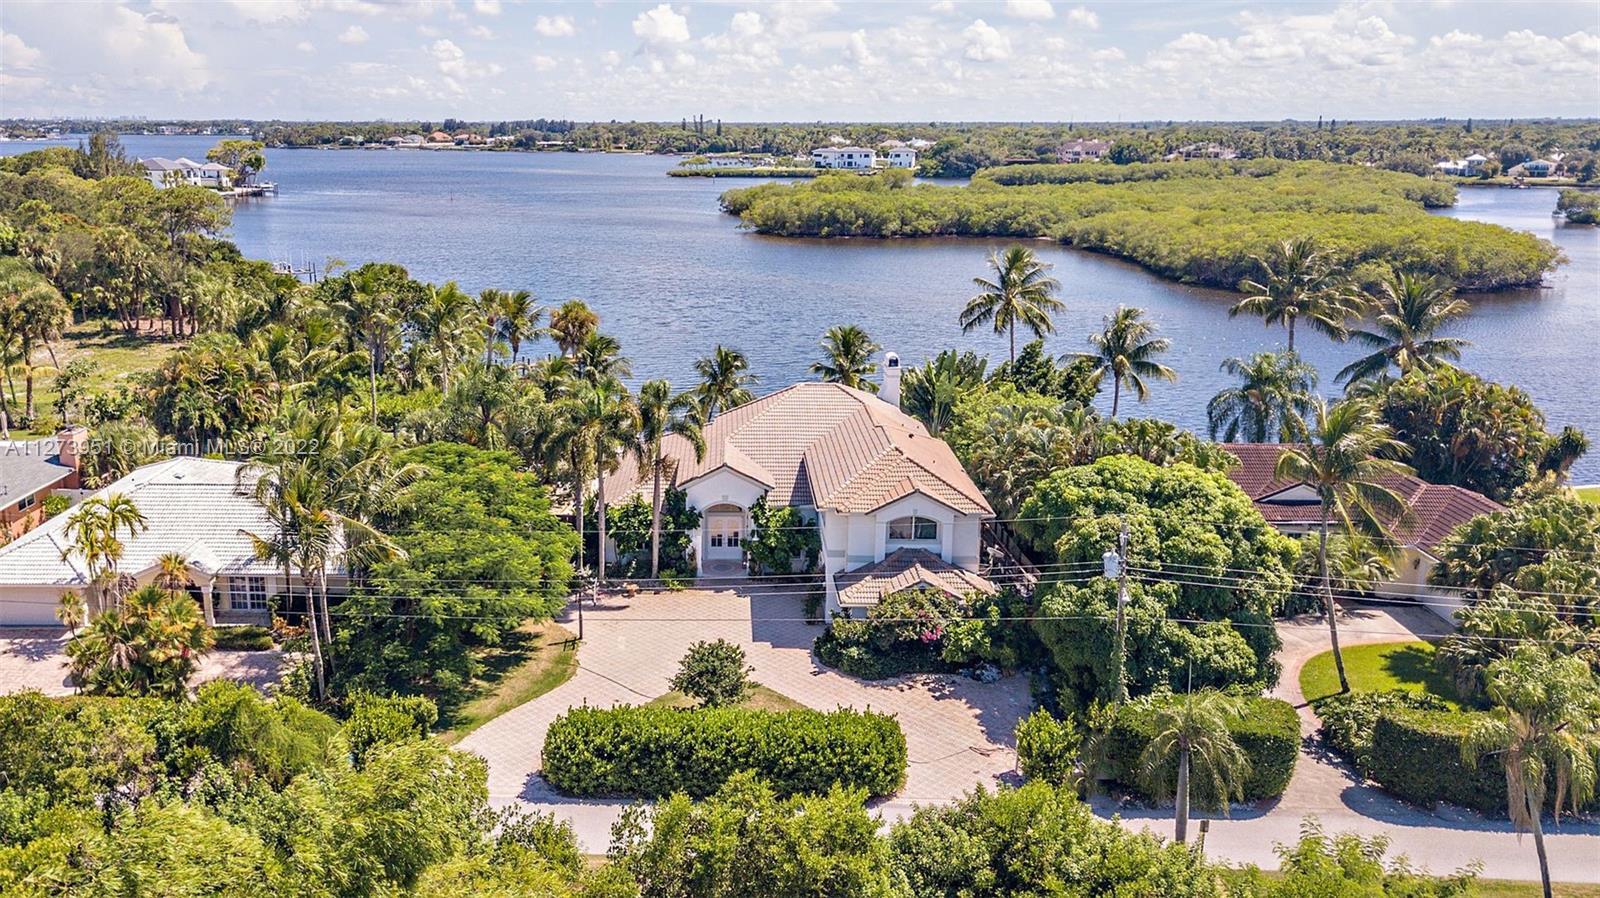 AMAZING VIEWS AS FAR AS THE EYE CAN SEE FROM THIS OVER 4100SF 4 BED, 5 BATH INTRACOASTAL FRONTAGE HO